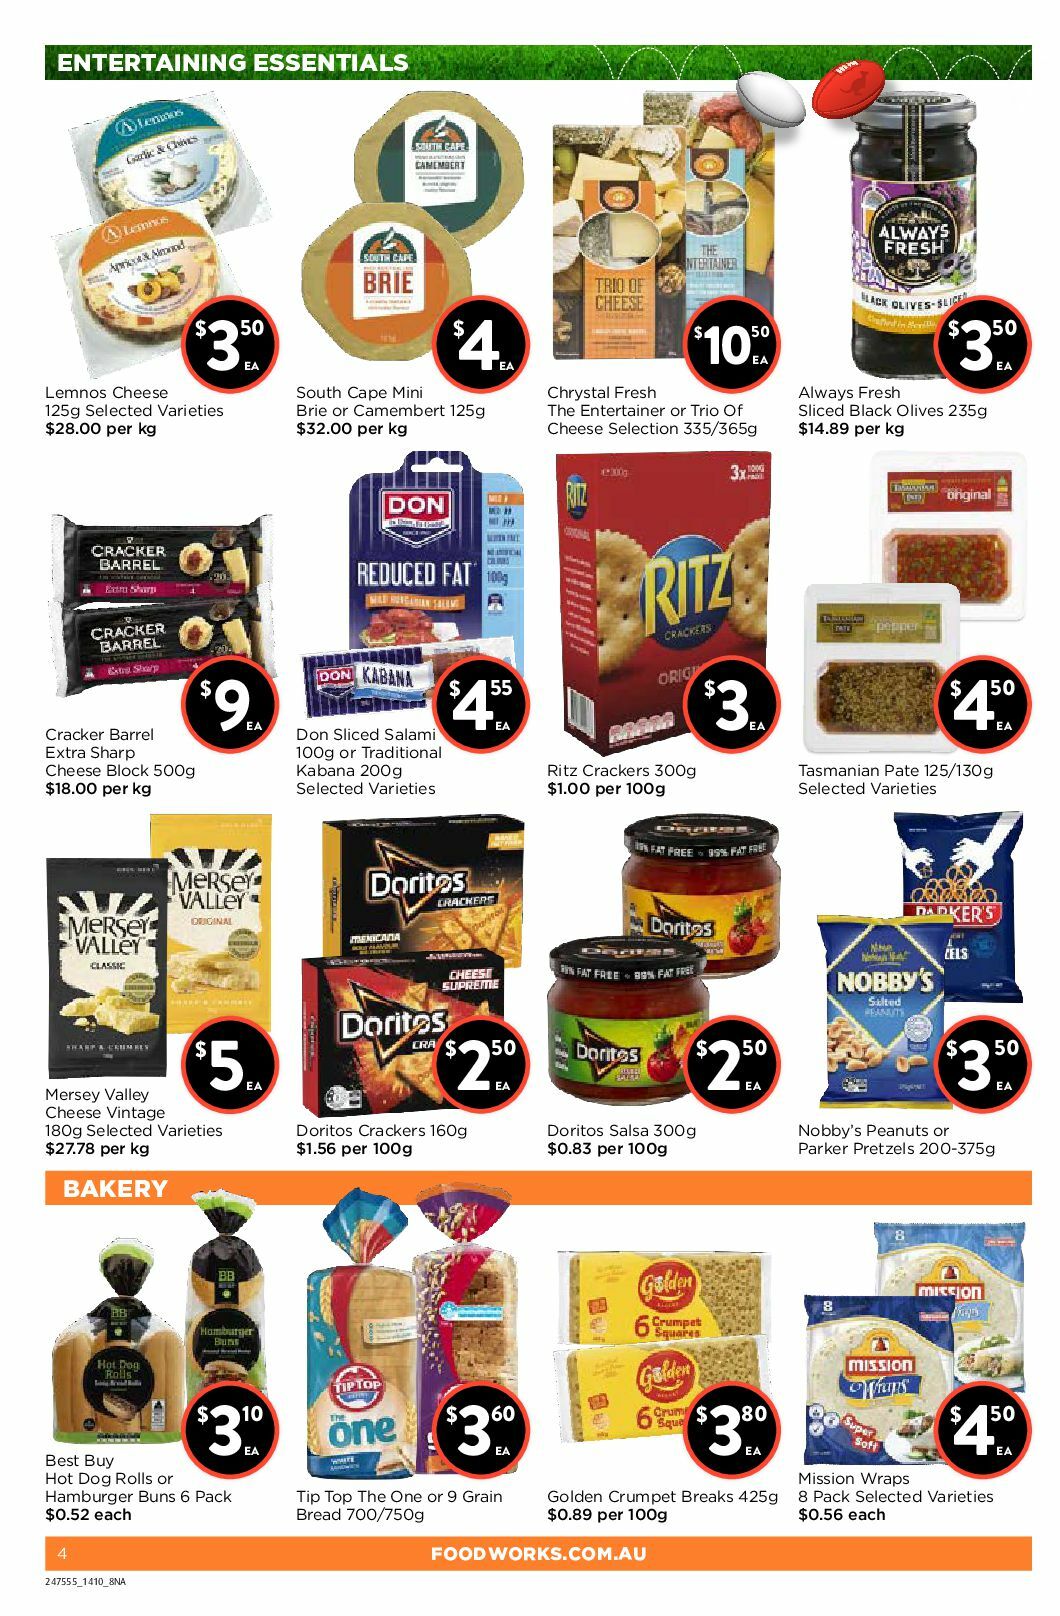 FoodWorks Catalogues from 14 October